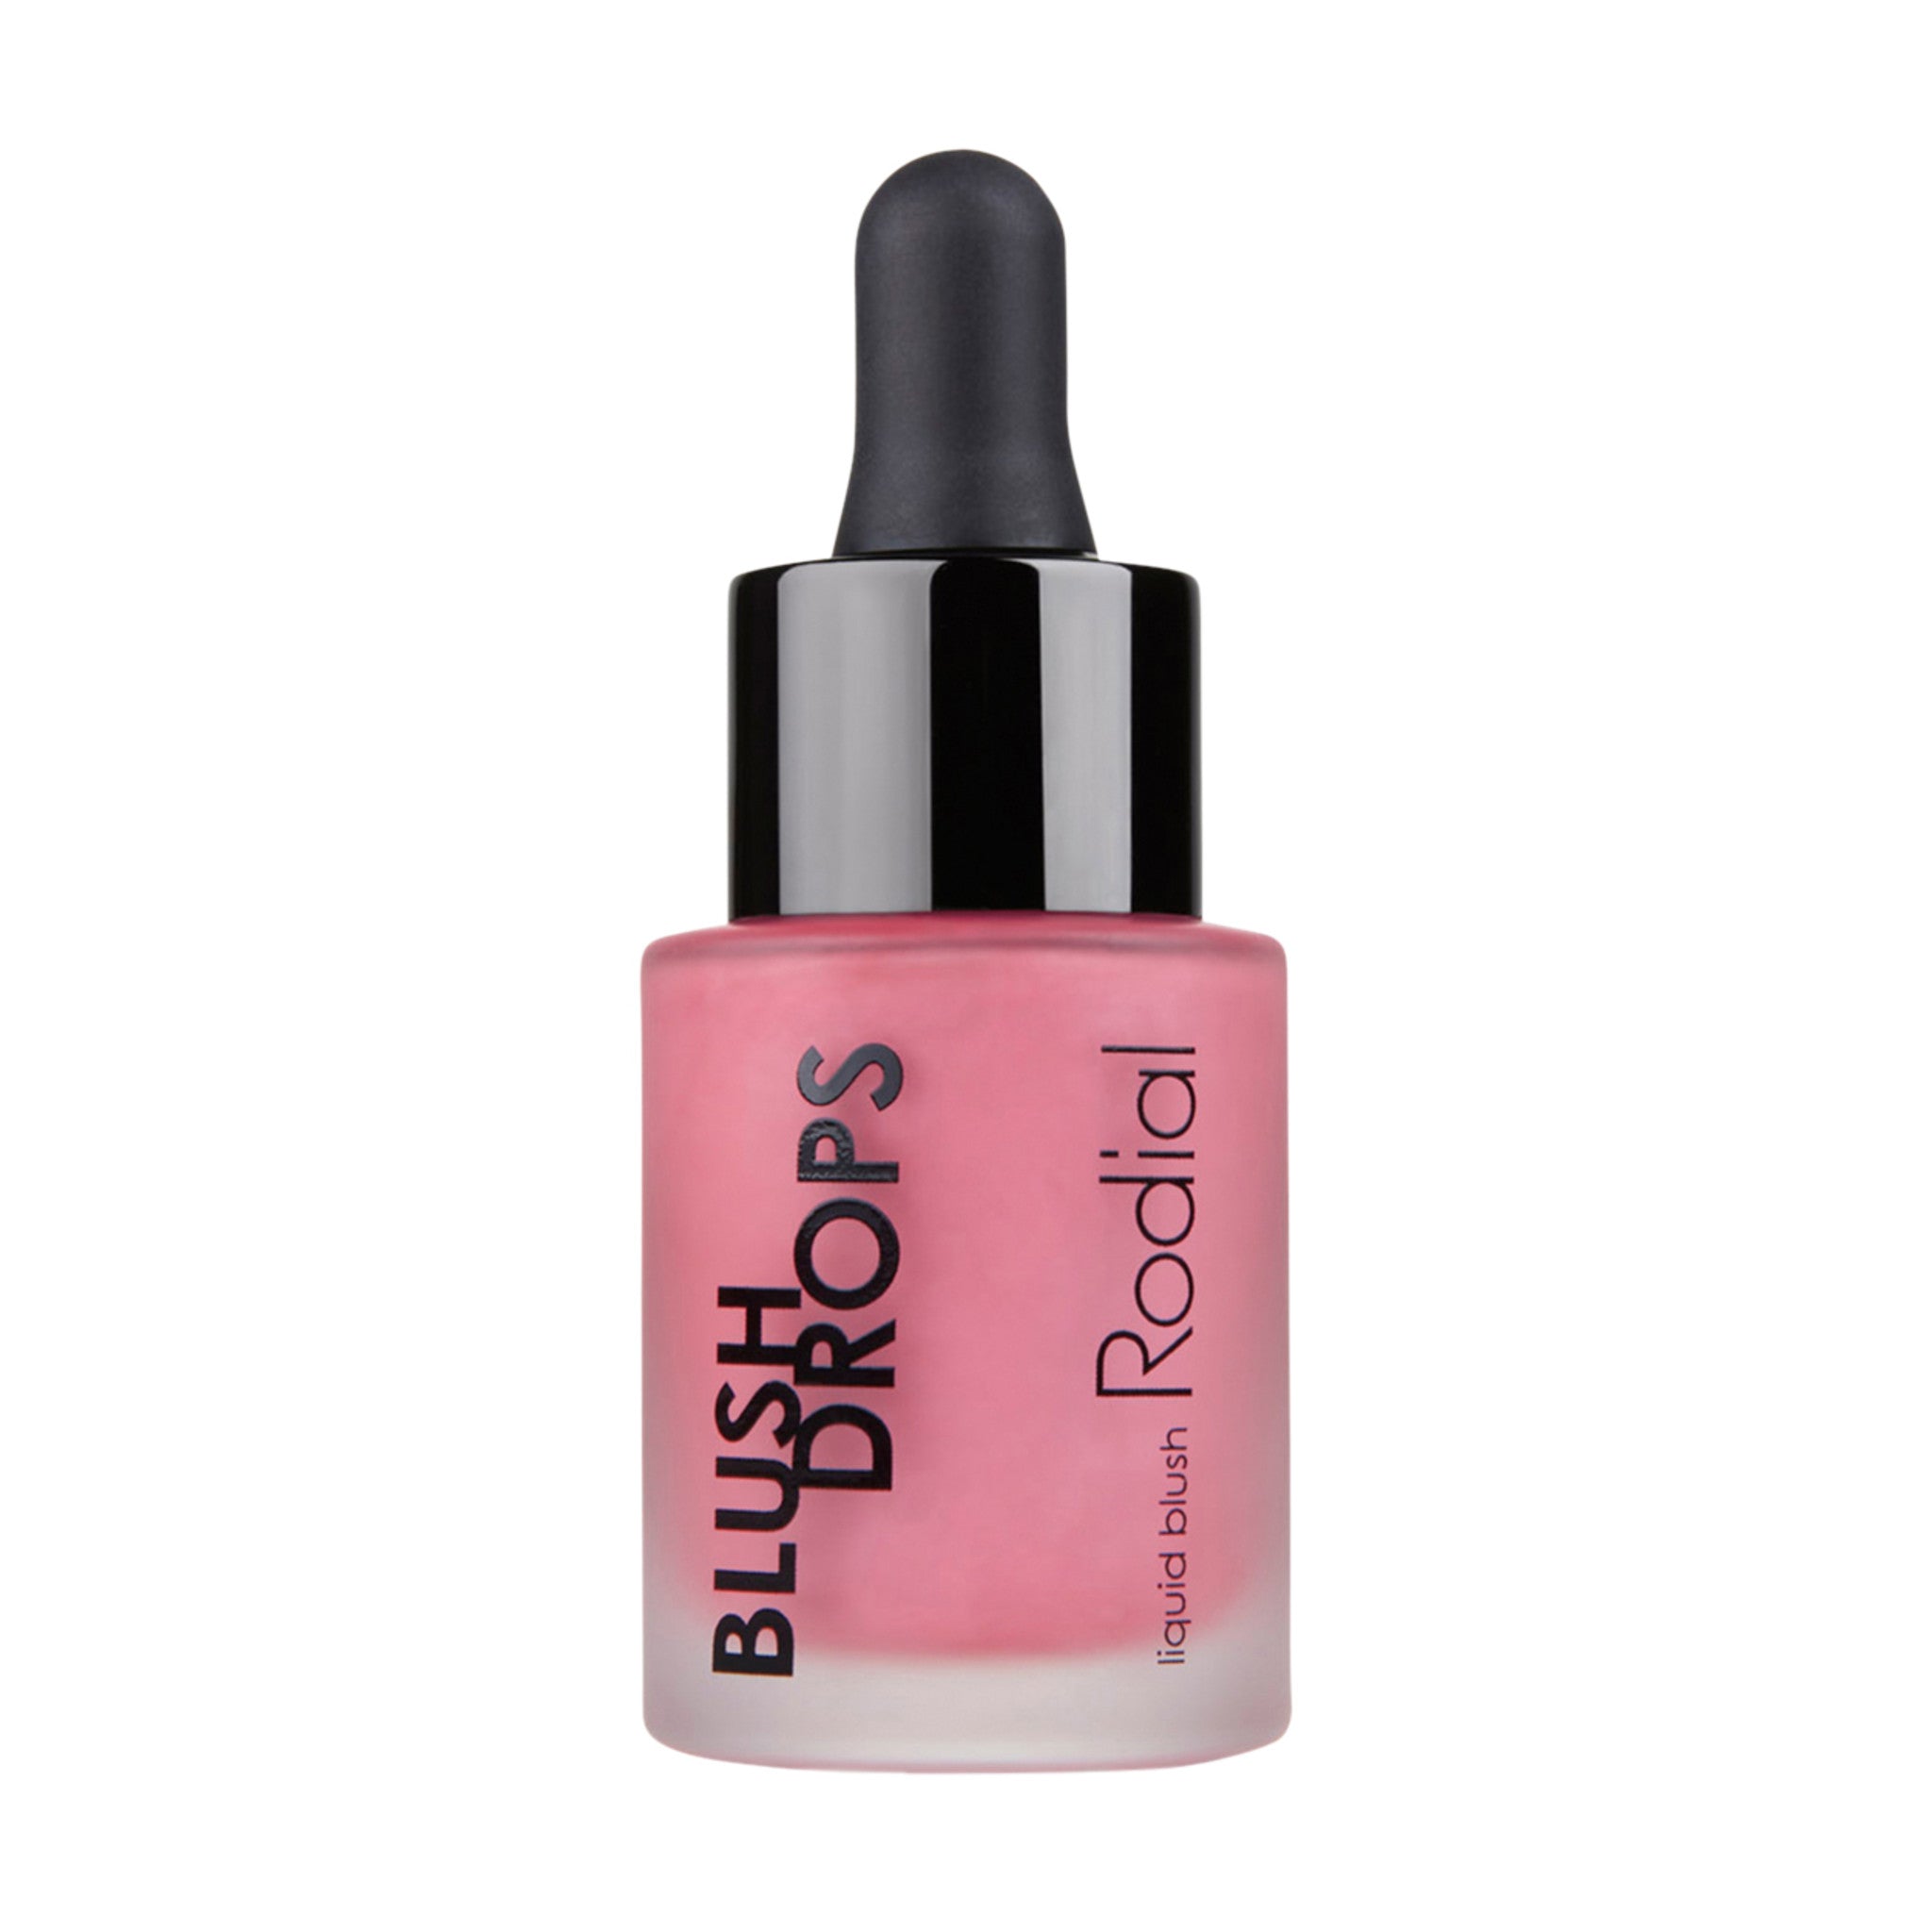 Rodial Blush Drops Color/Shade variant: Frosted Pink main image. This product is in the color pink